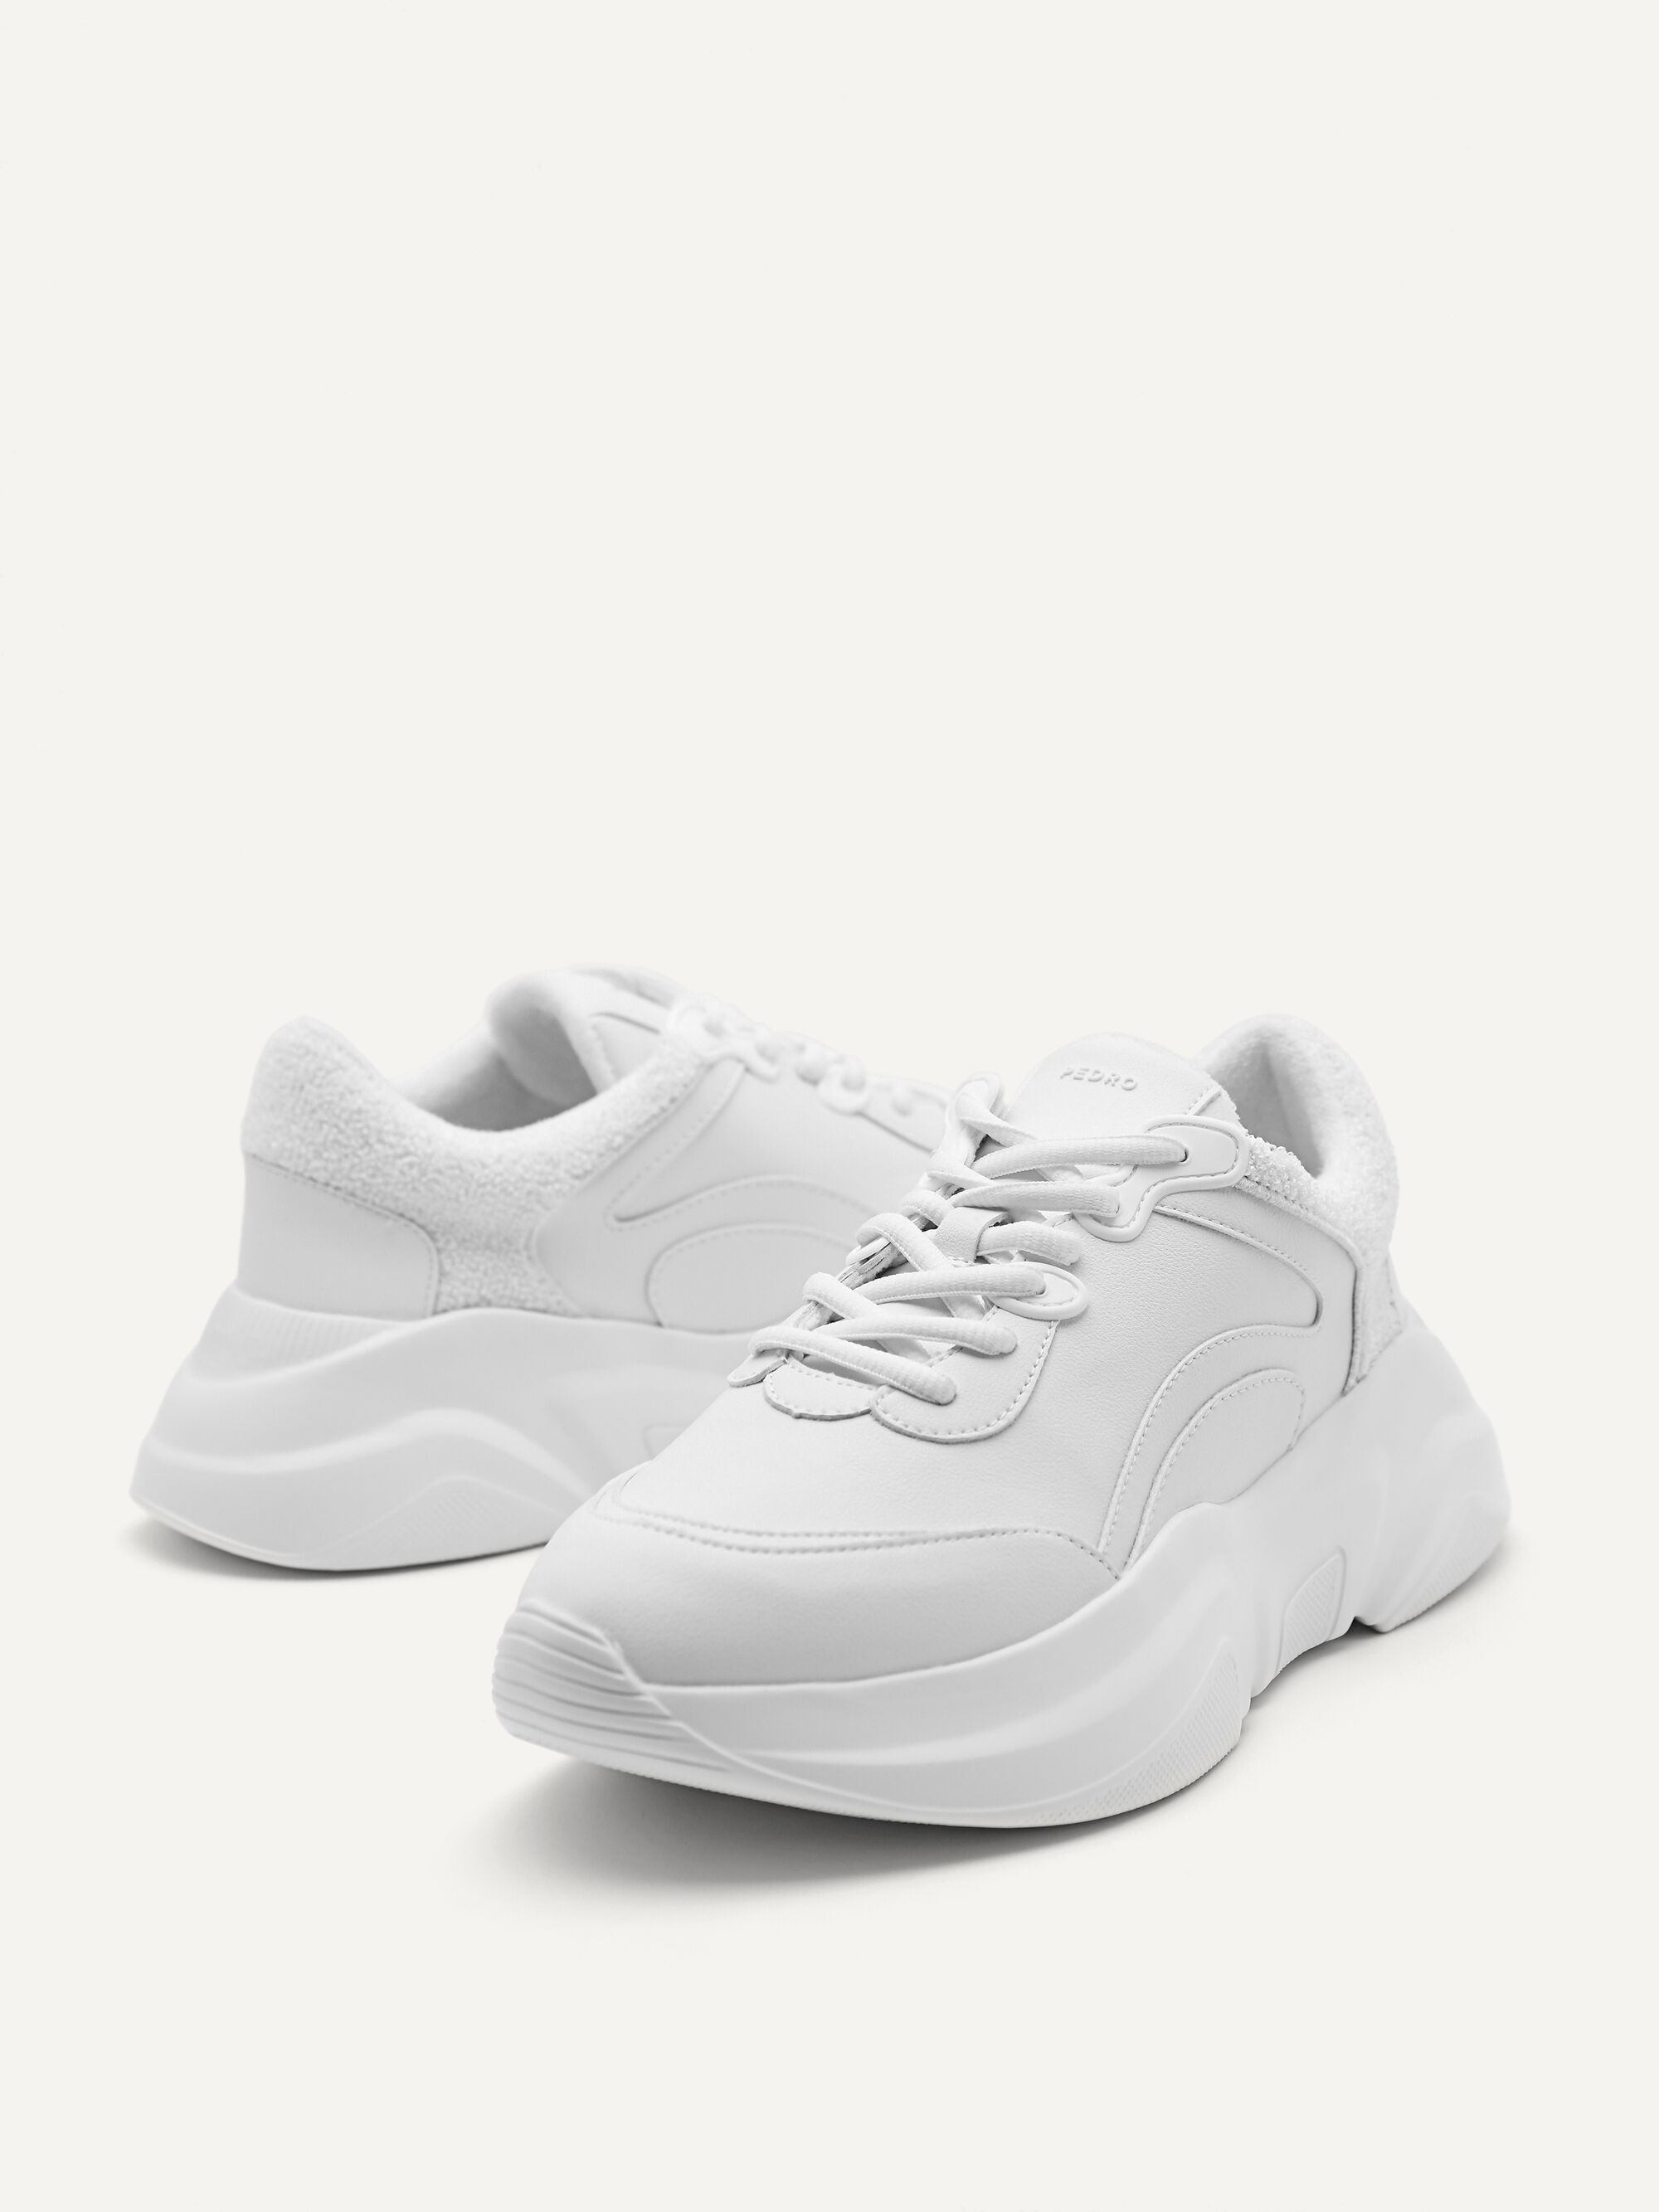 Altura Low Top Sneakers, White